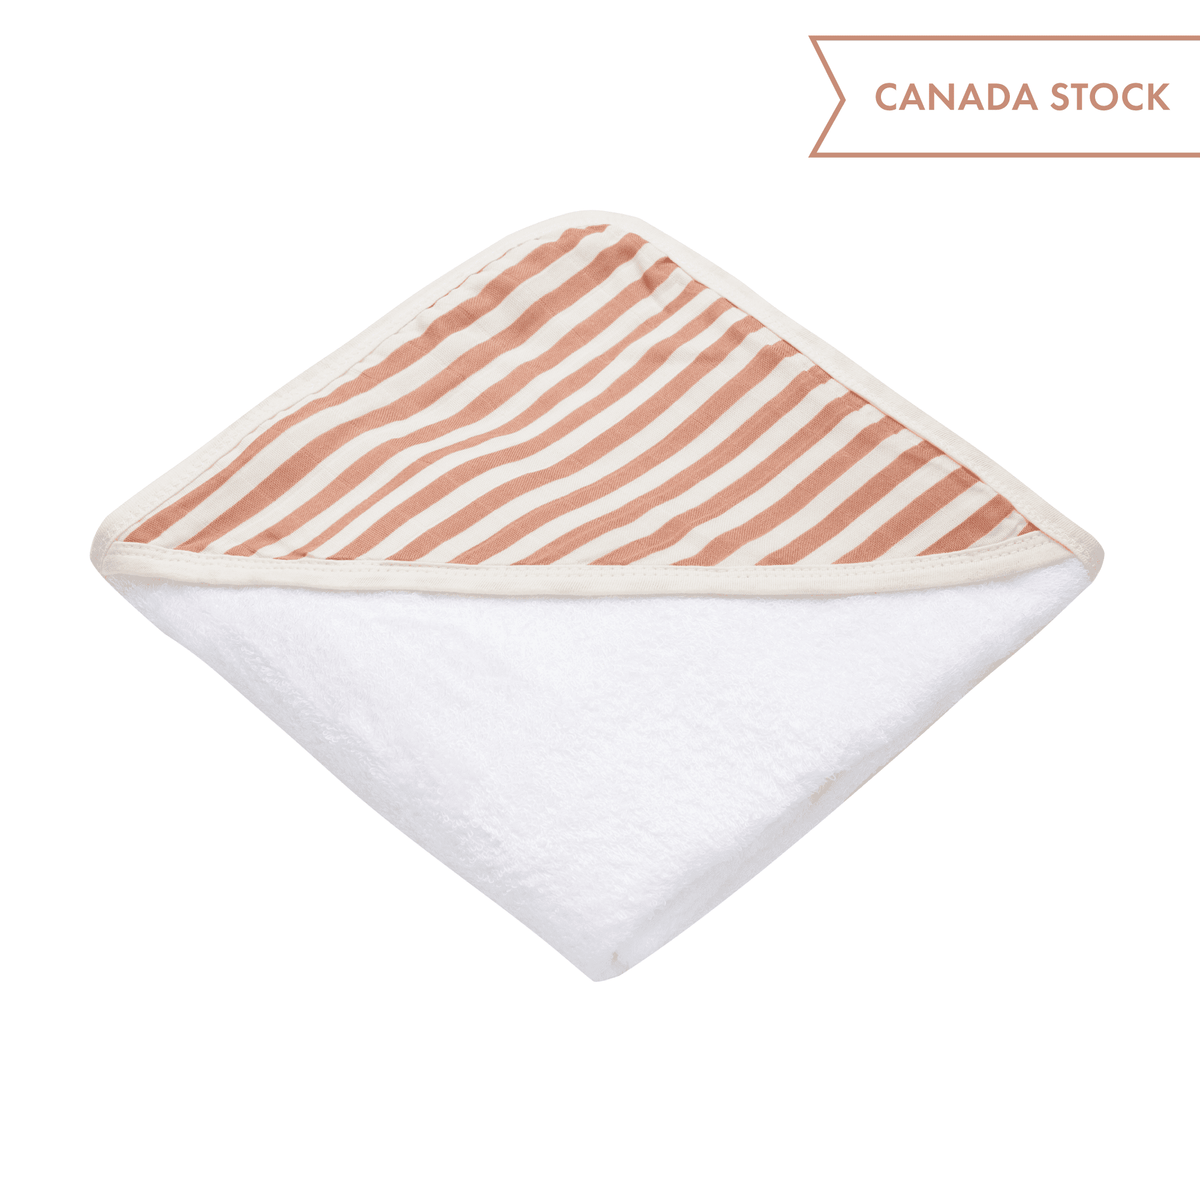 Hooded Towel - Stripes - Canada Stock